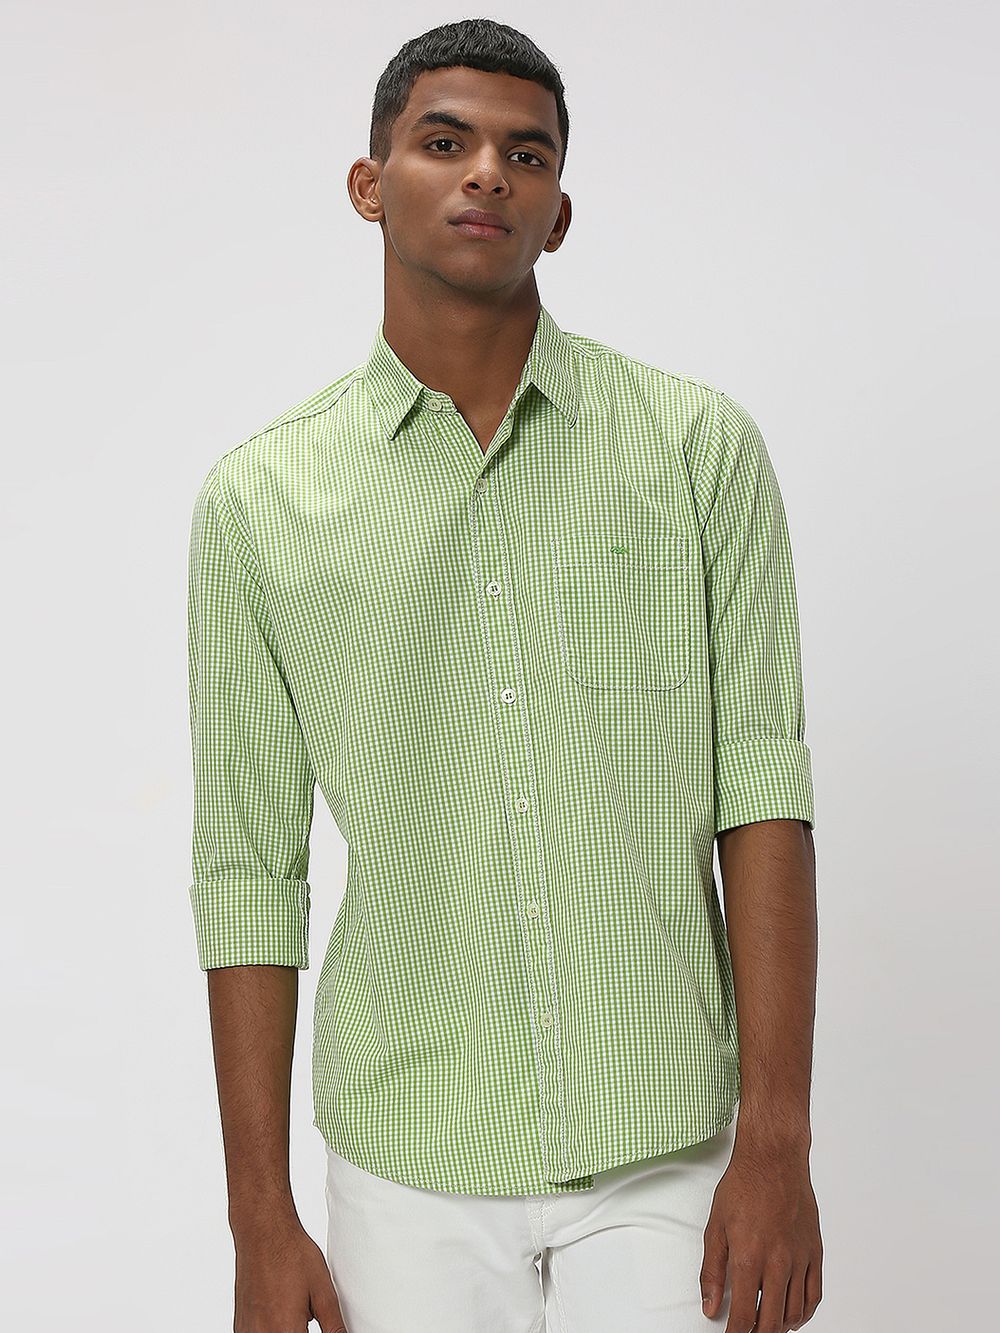 Green & White Gingham Check Slim Fit Casual Shirt